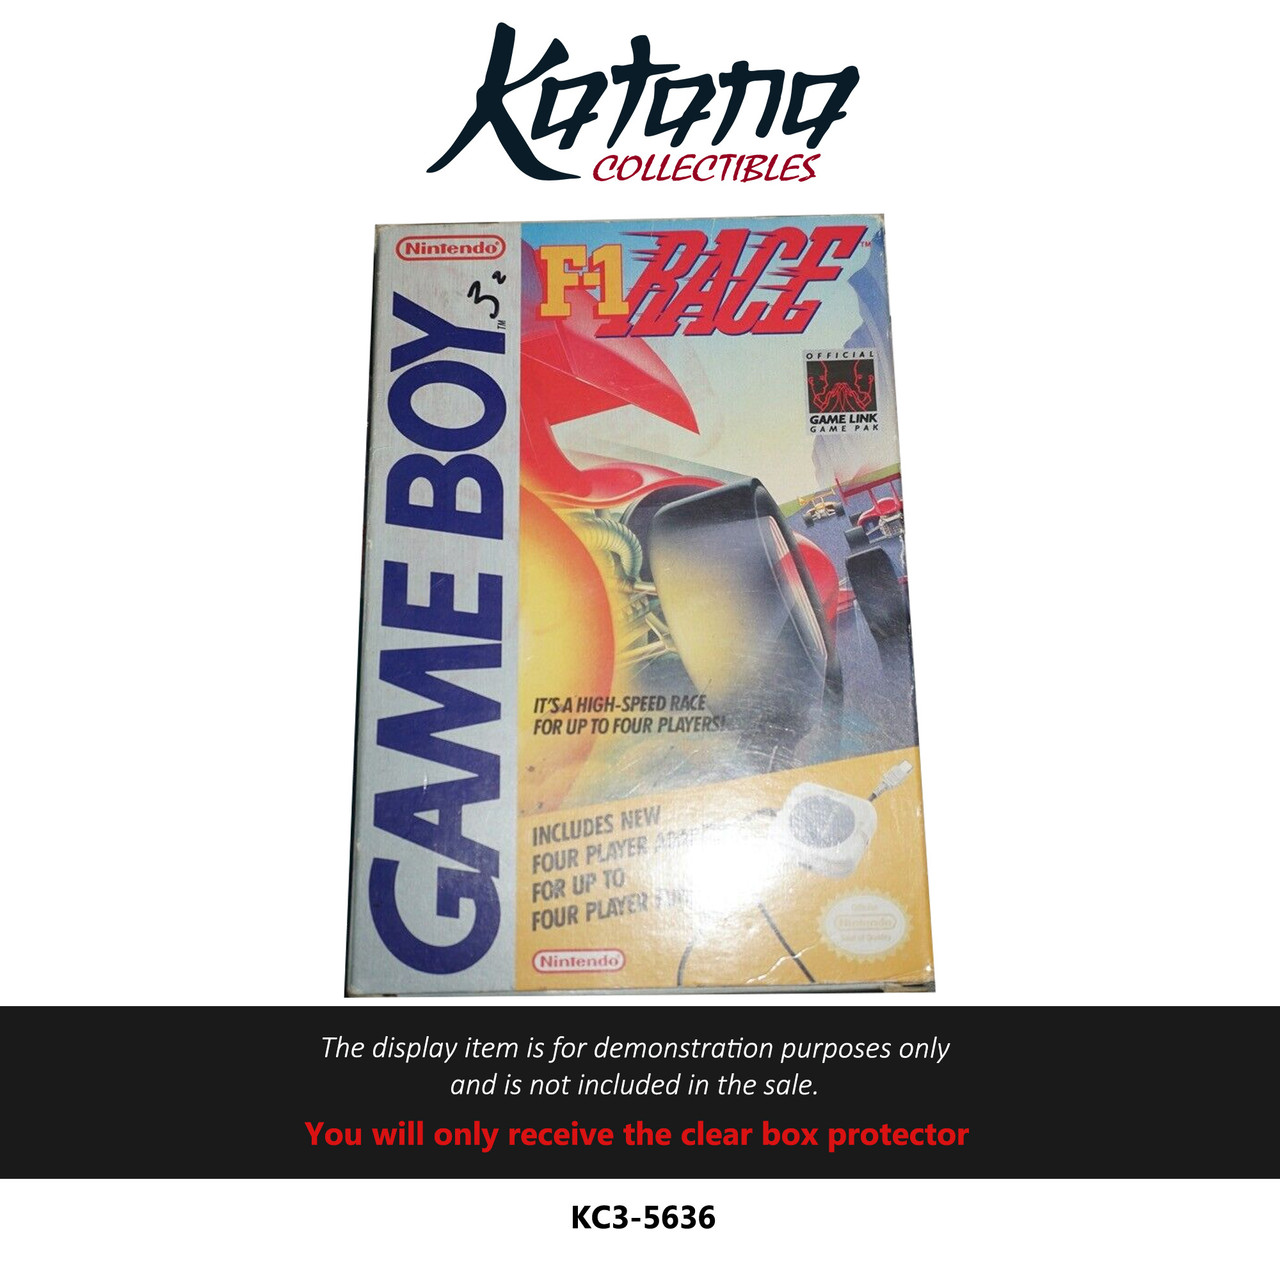 Katana Collectibles Protector For F-1 Race for Gameboy with 4 Player Adapter